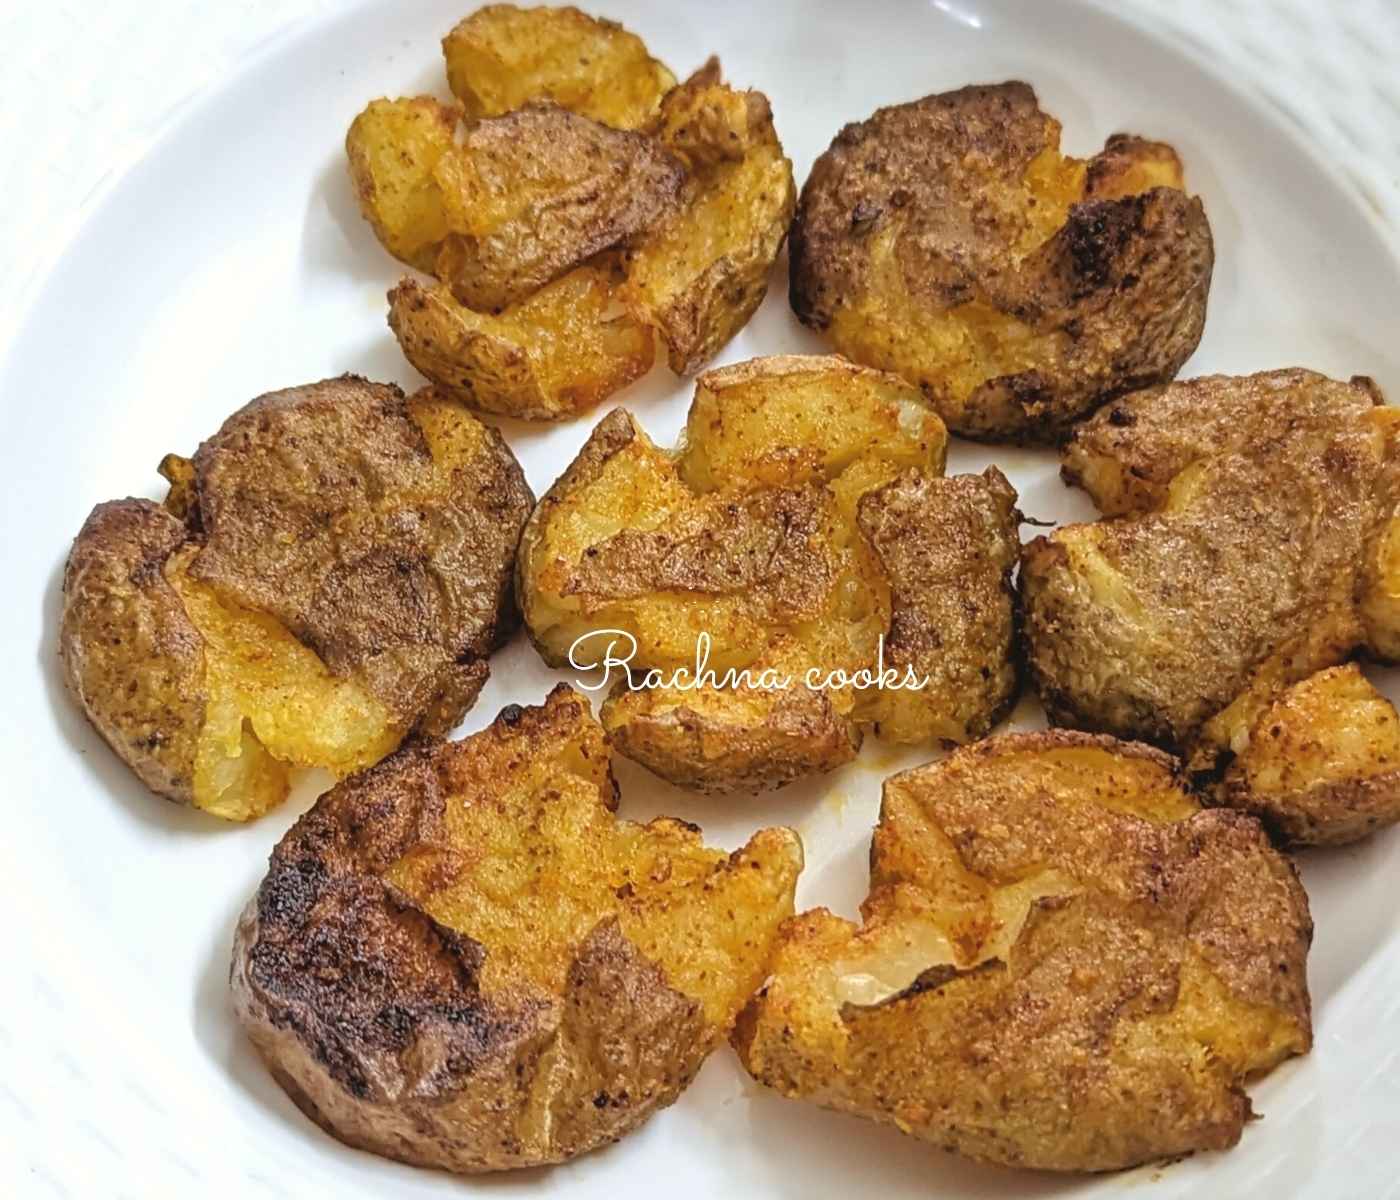 Delicious smashed air fryer potatoes served on a plate.